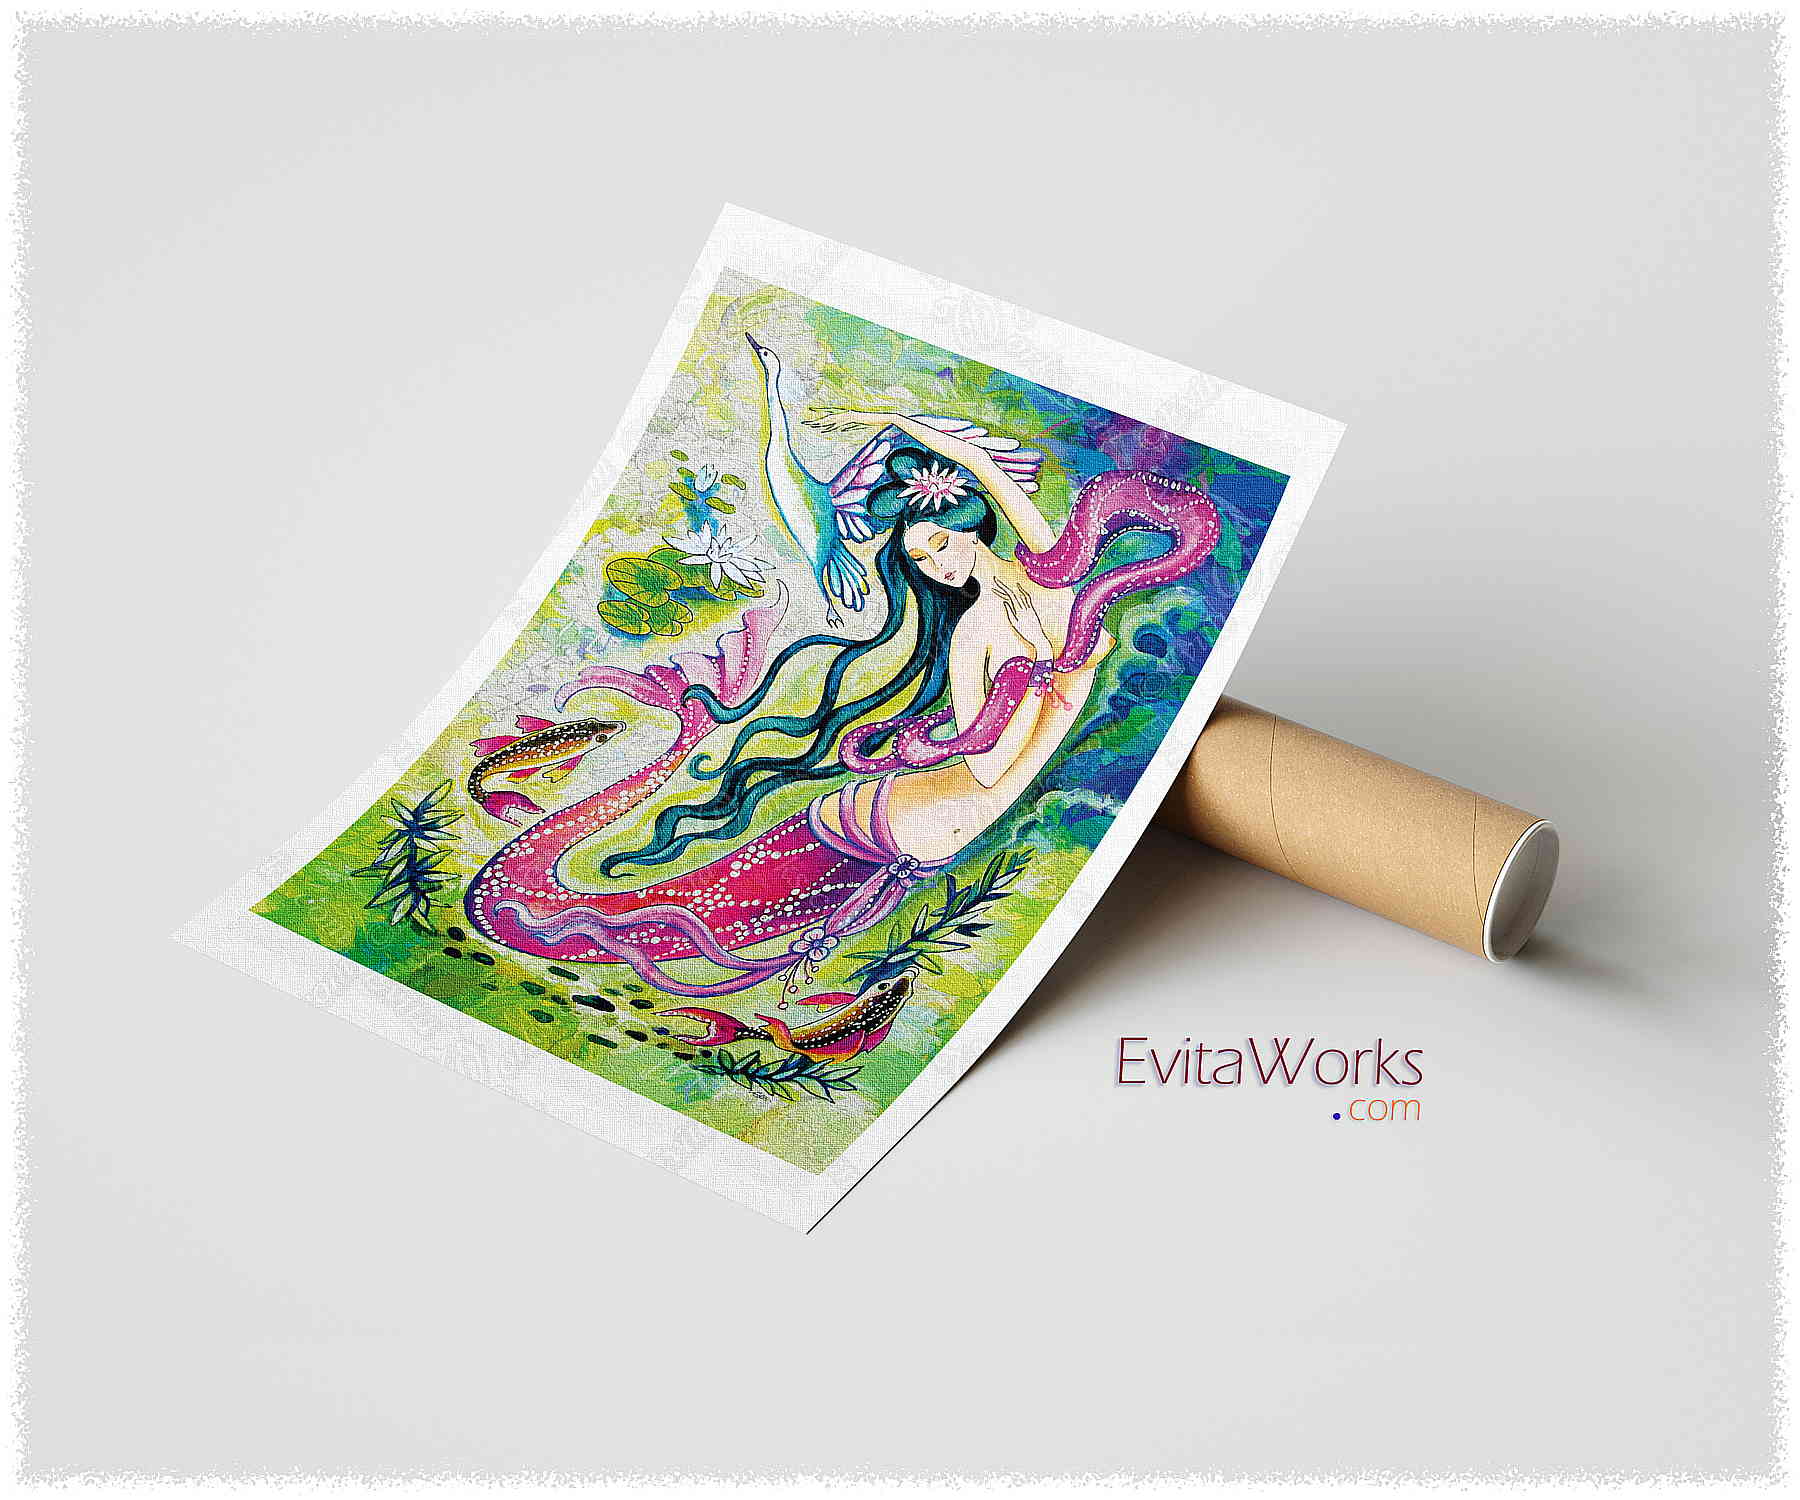 Hit to learn about "Koi Fish Mermaid, beautiful female creature" on prints